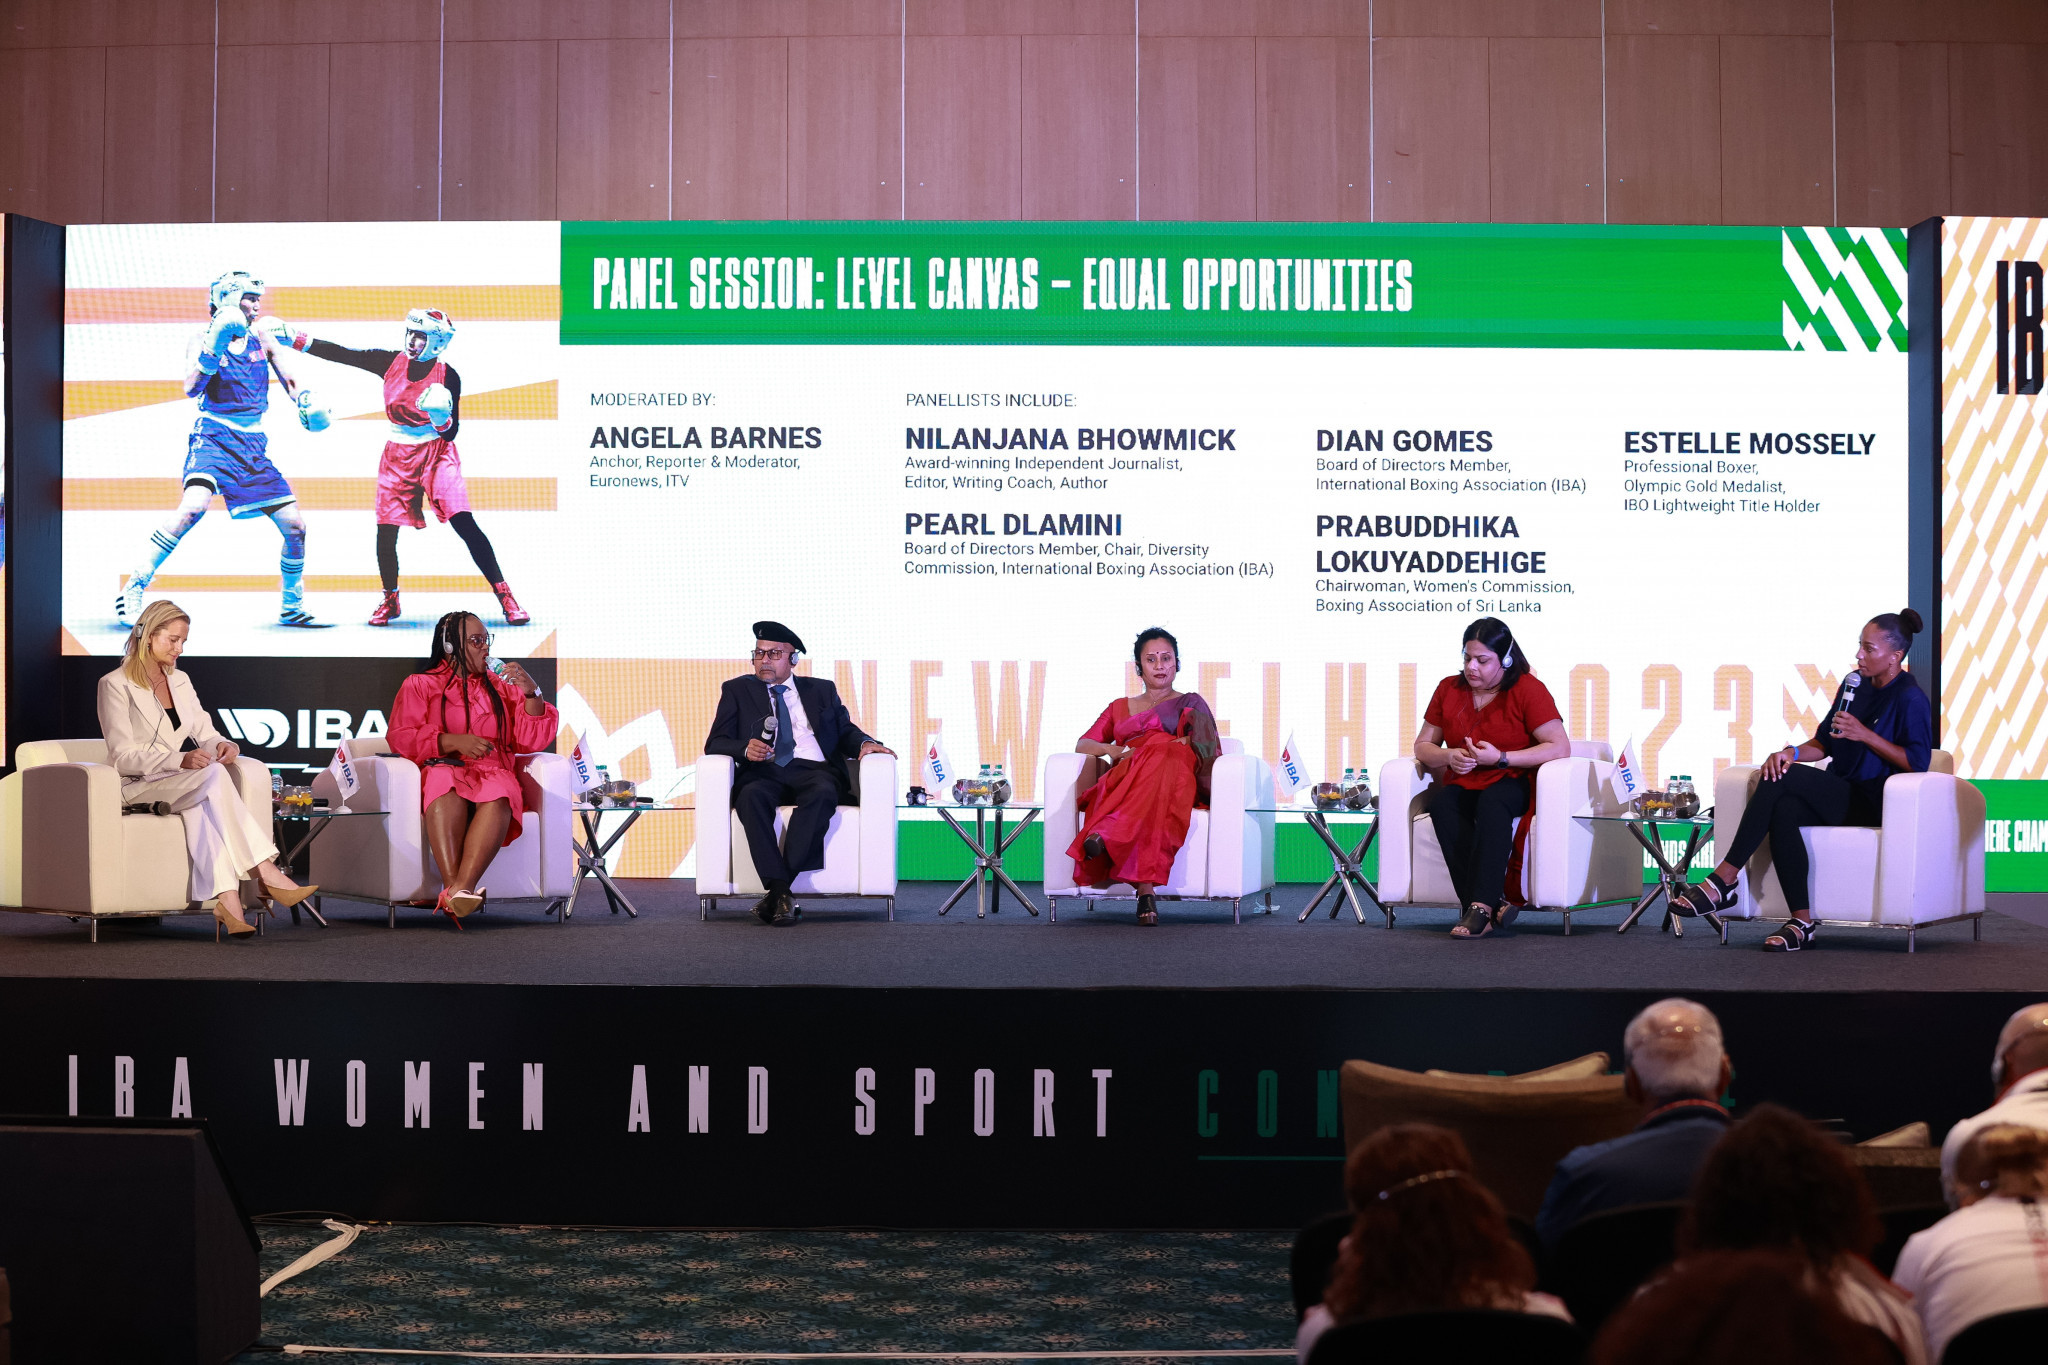 The International Boxing Association staged its first-ever Women and Sport Conference in New Delhi ©IBA